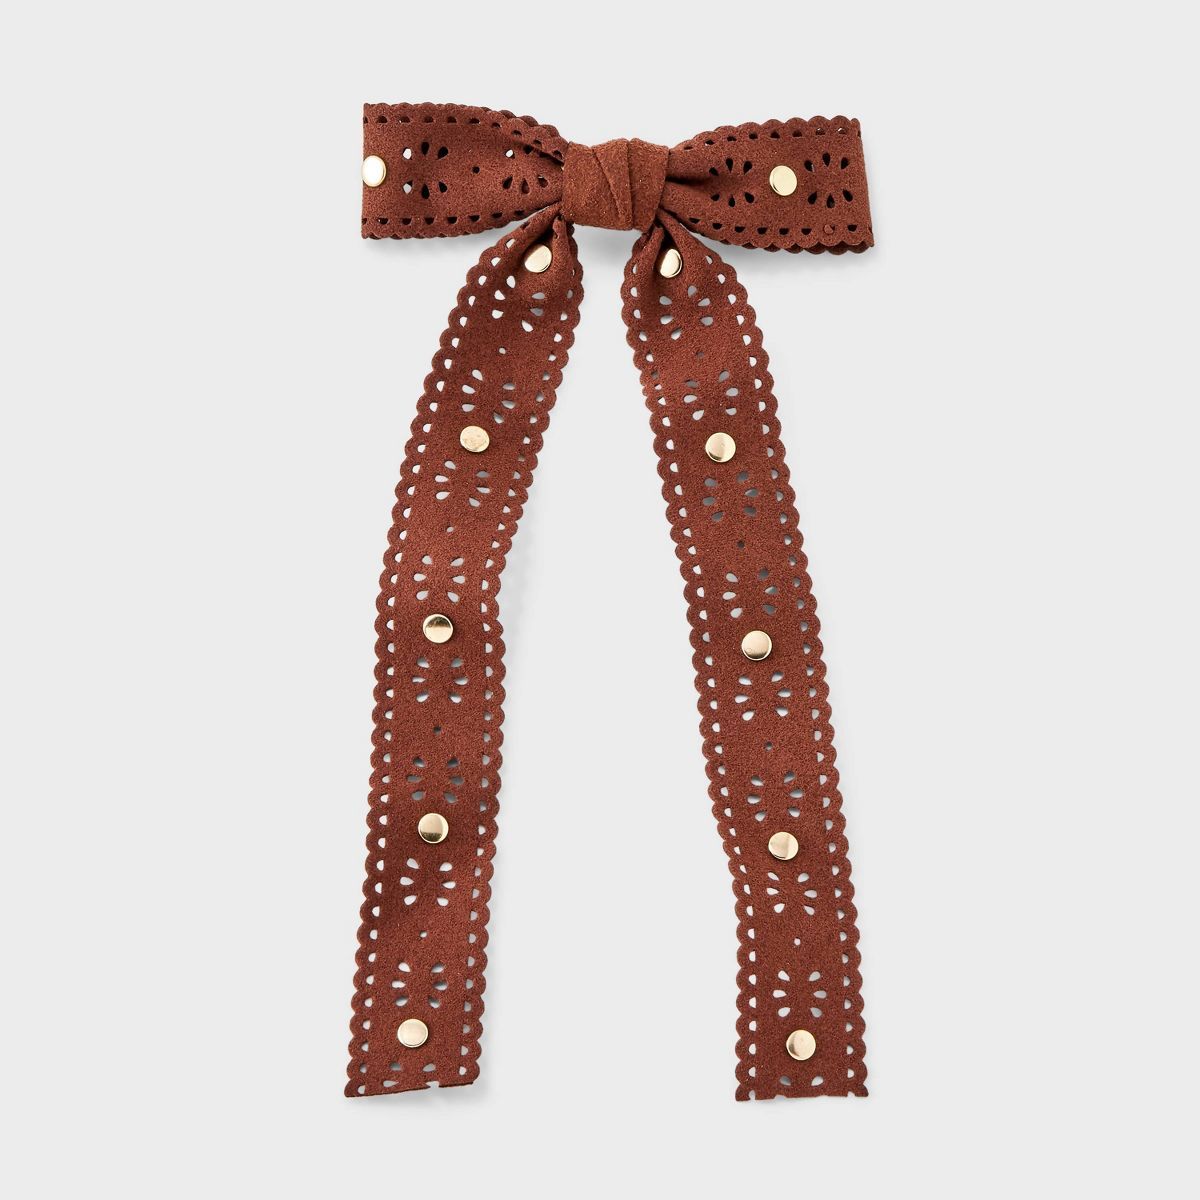 Lace Bow in Metal Hair Barrette - Wild Fable™ Brown | Target